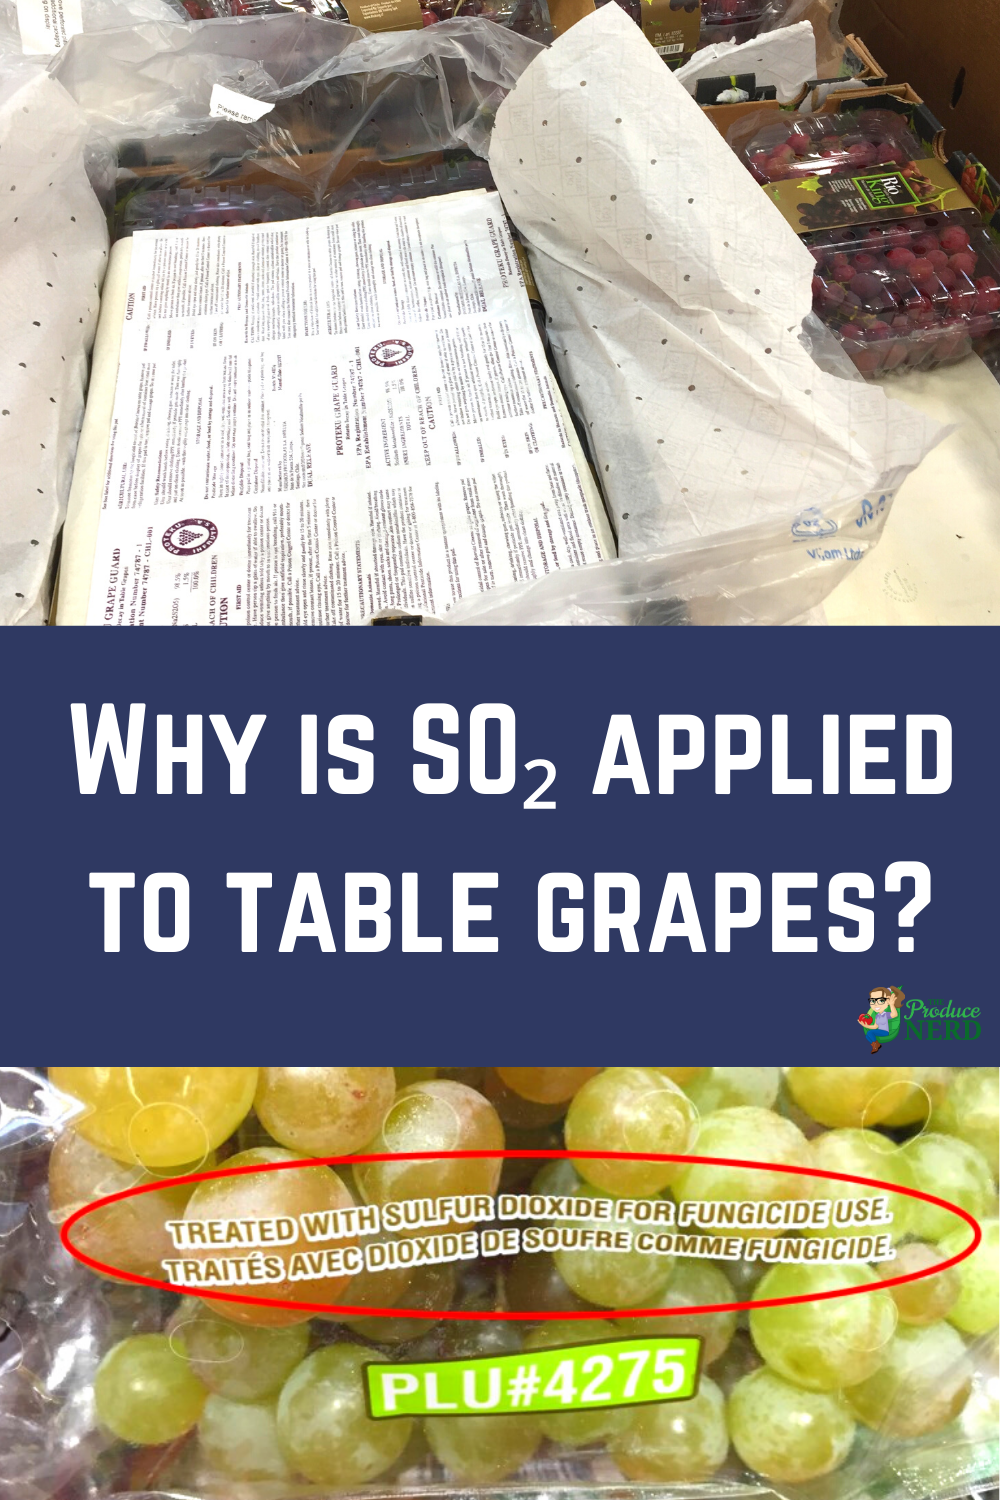 You are currently viewing Why is Sulfur Dioxide Applied to Grapes?